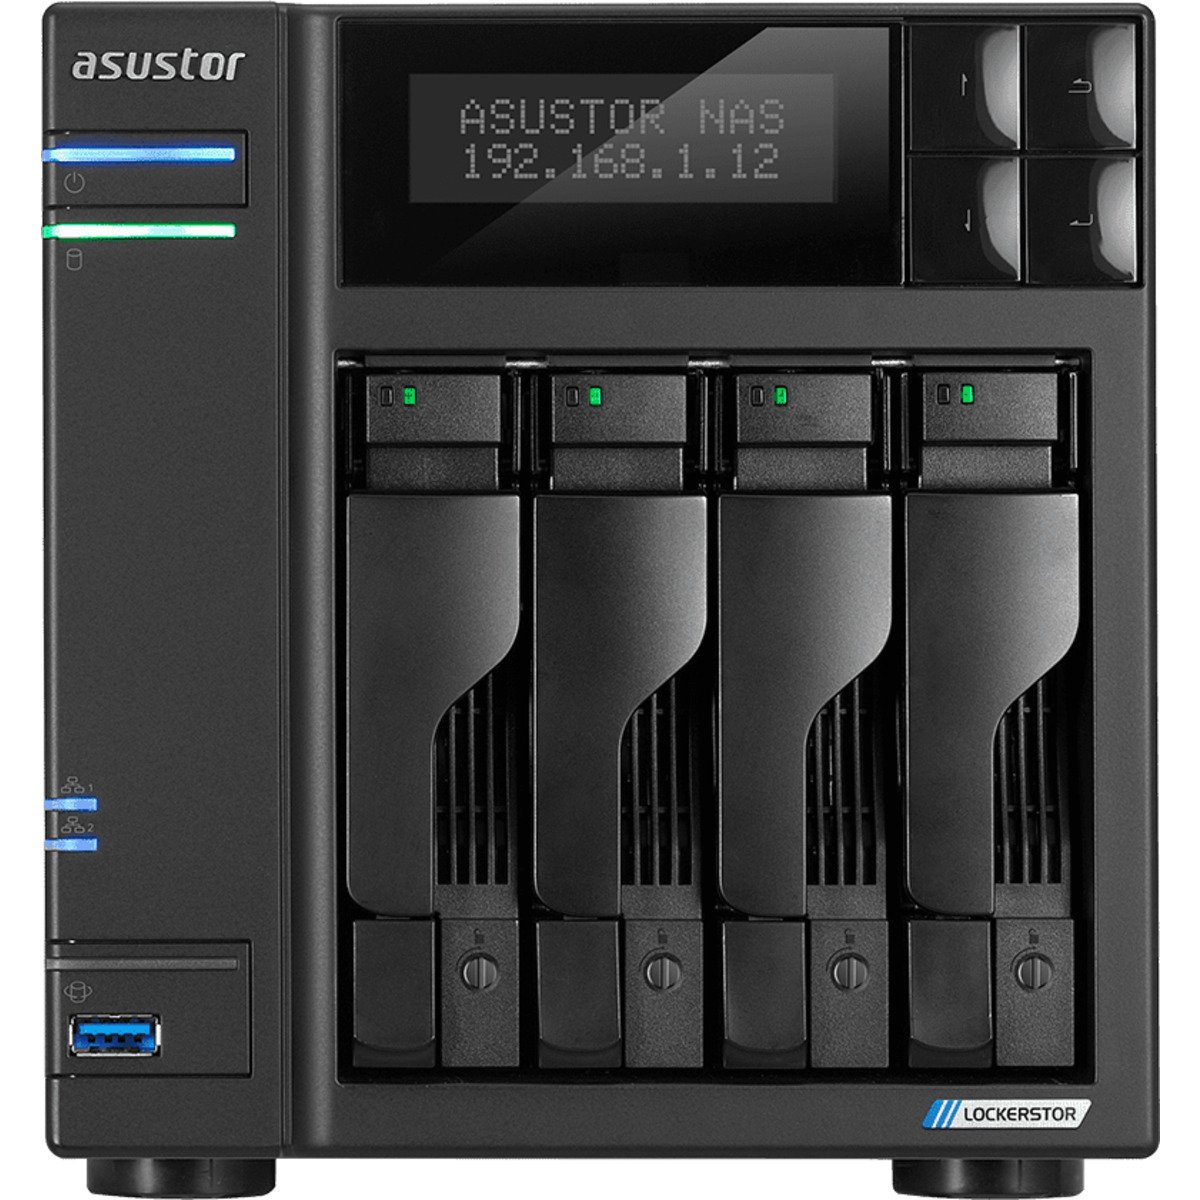 ASUSTOR AS6604T Lockerstor 4 40tb 4-Bay Desktop Multimedia / Power User / Business NAS - Network Attached Storage Device 4x10tb Western Digital Red Pro WD102KFBX 3.5 7200rpm SATA 6Gb/s HDD NAS Class Drives Installed - Burn-In Tested - FREE RAM UPGRADE AS6604T Lockerstor 4